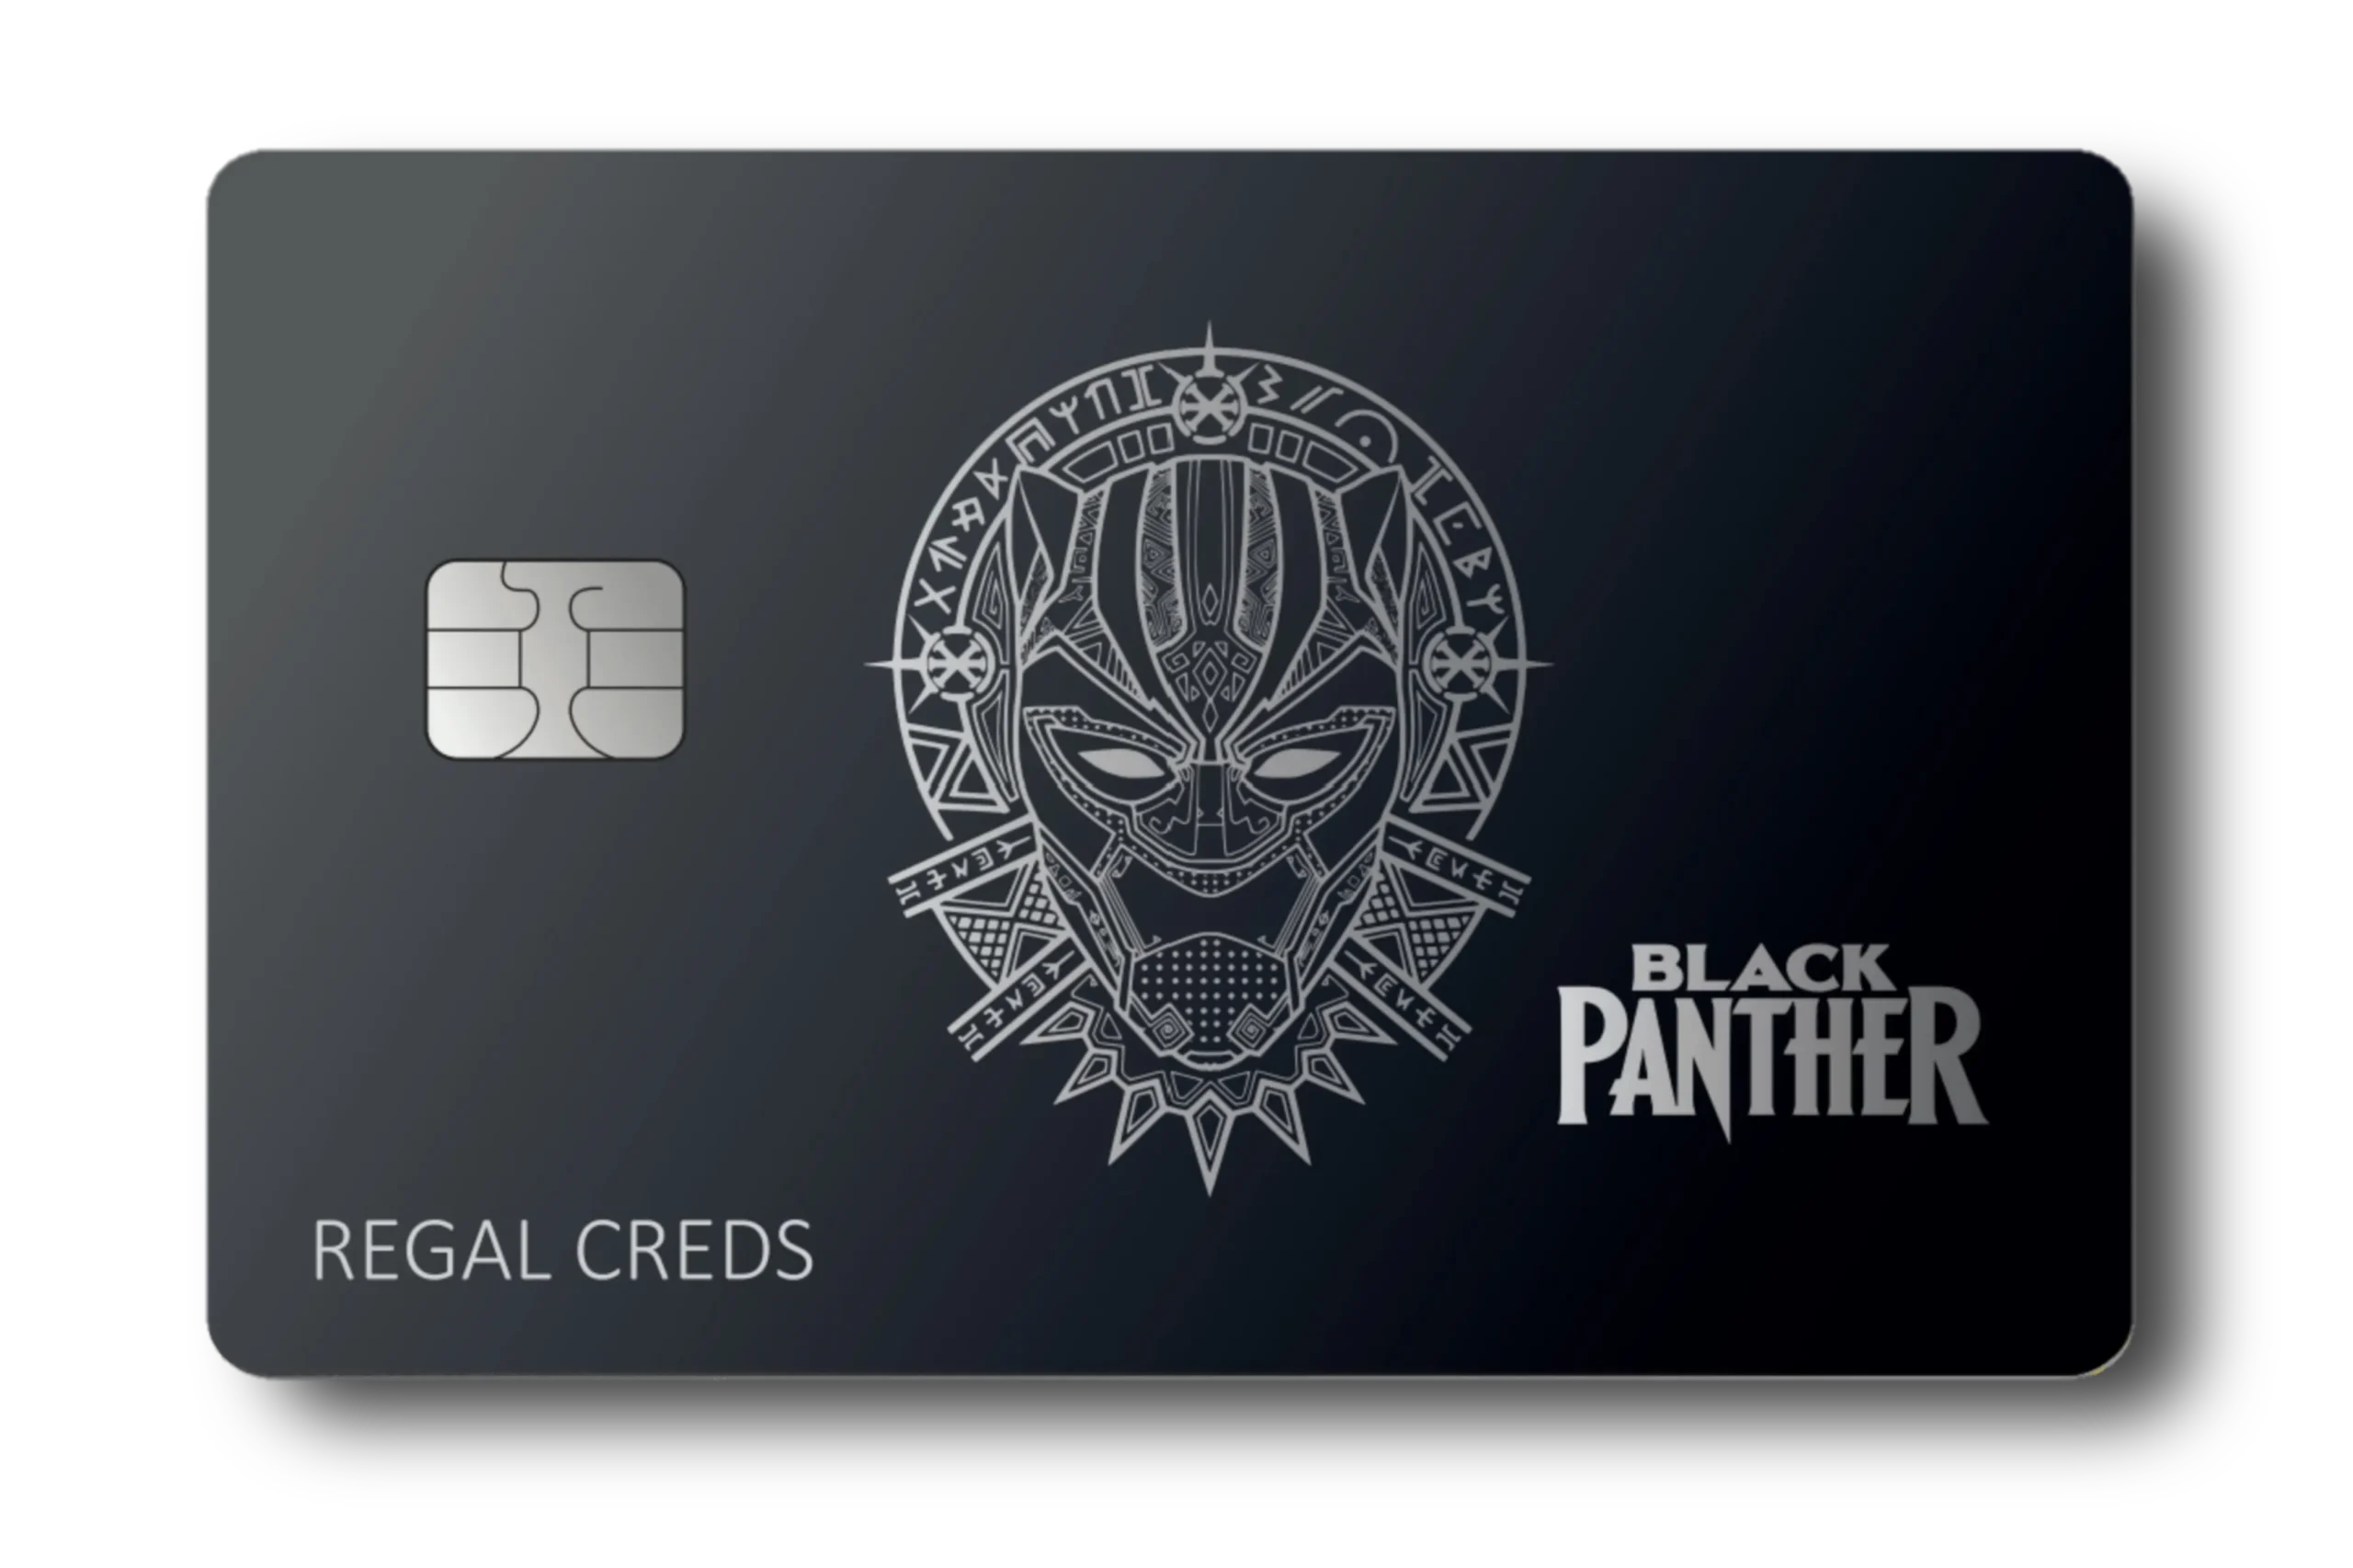 The 'Black Panther' Card